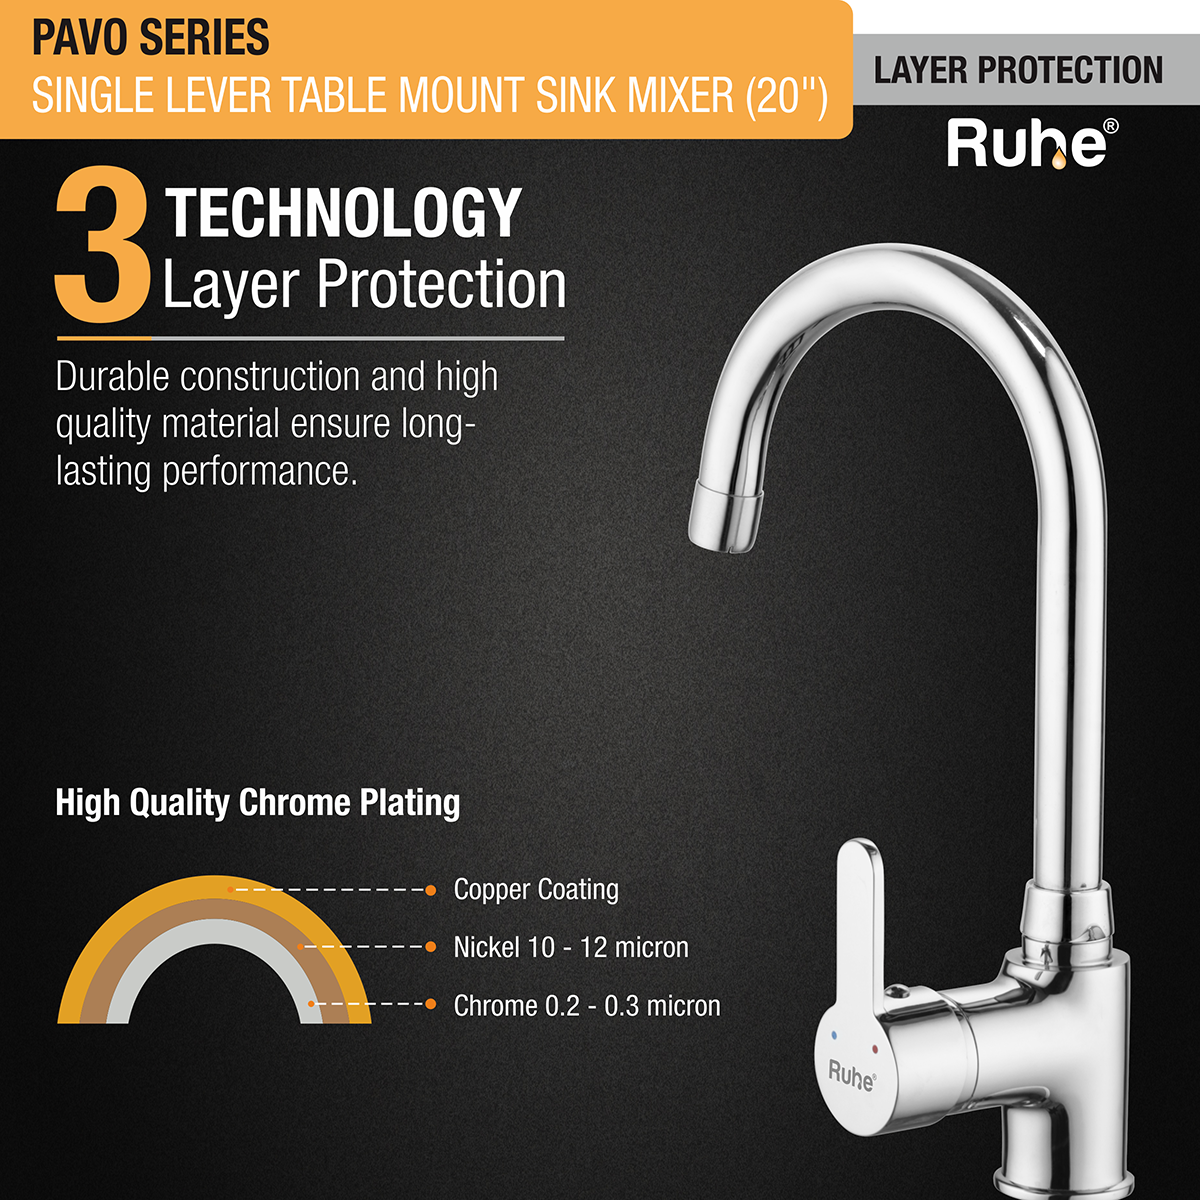 Pavo Single Lever Table Mount Sink Mixer with Large (20 inches) Round Swivel Spout Faucet 3 layer protection